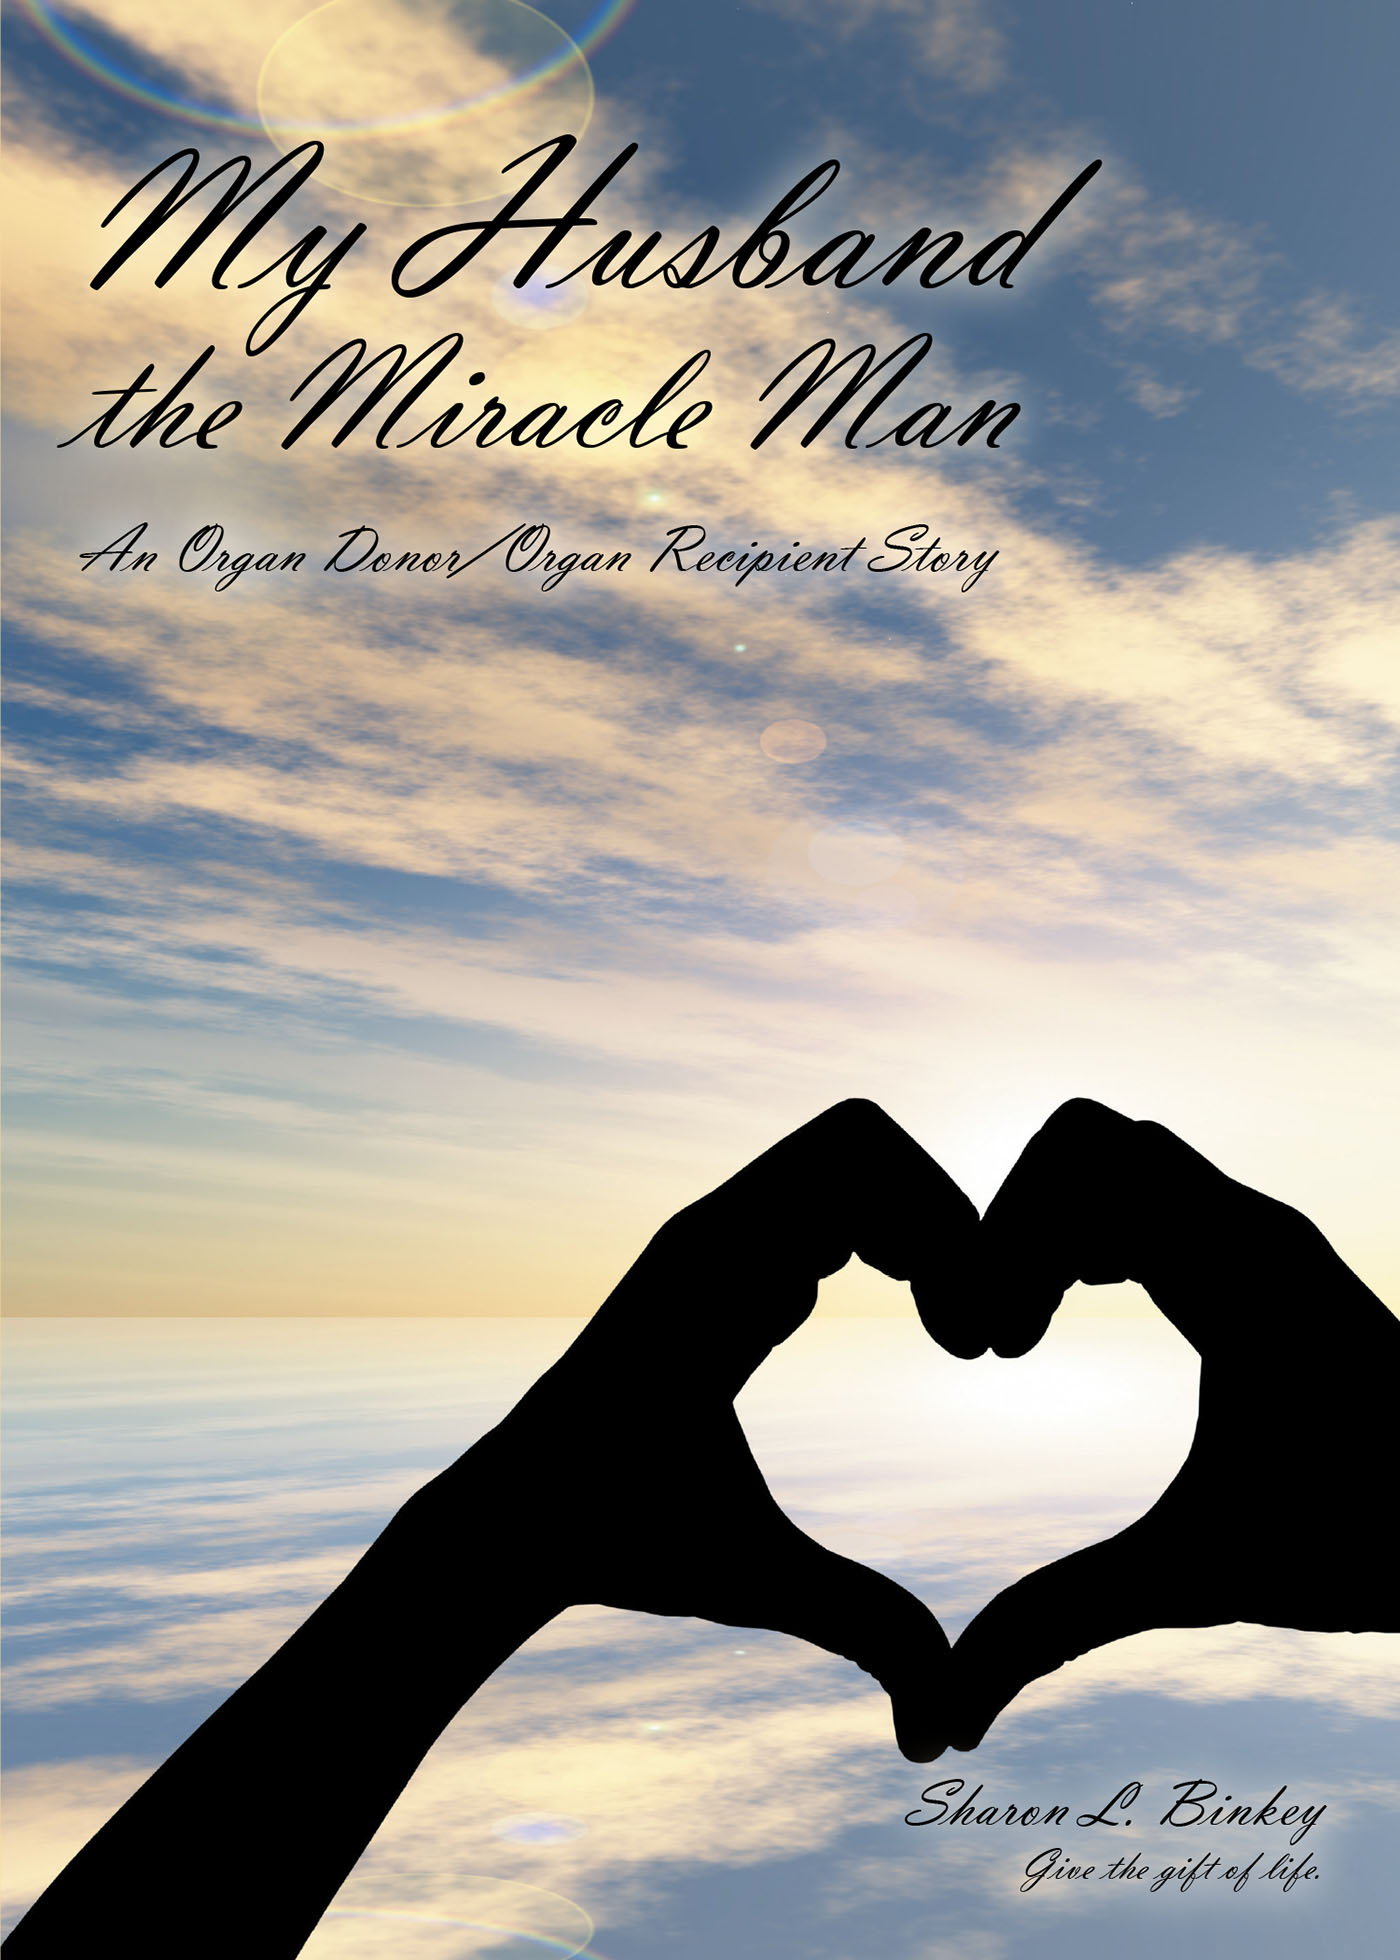 Author Sharon L. Binkey’s New Book, "My Husband the Miracle Man: An Organ Donor/Organ Recipient Story," Follows a Tumultuous Medical Journey